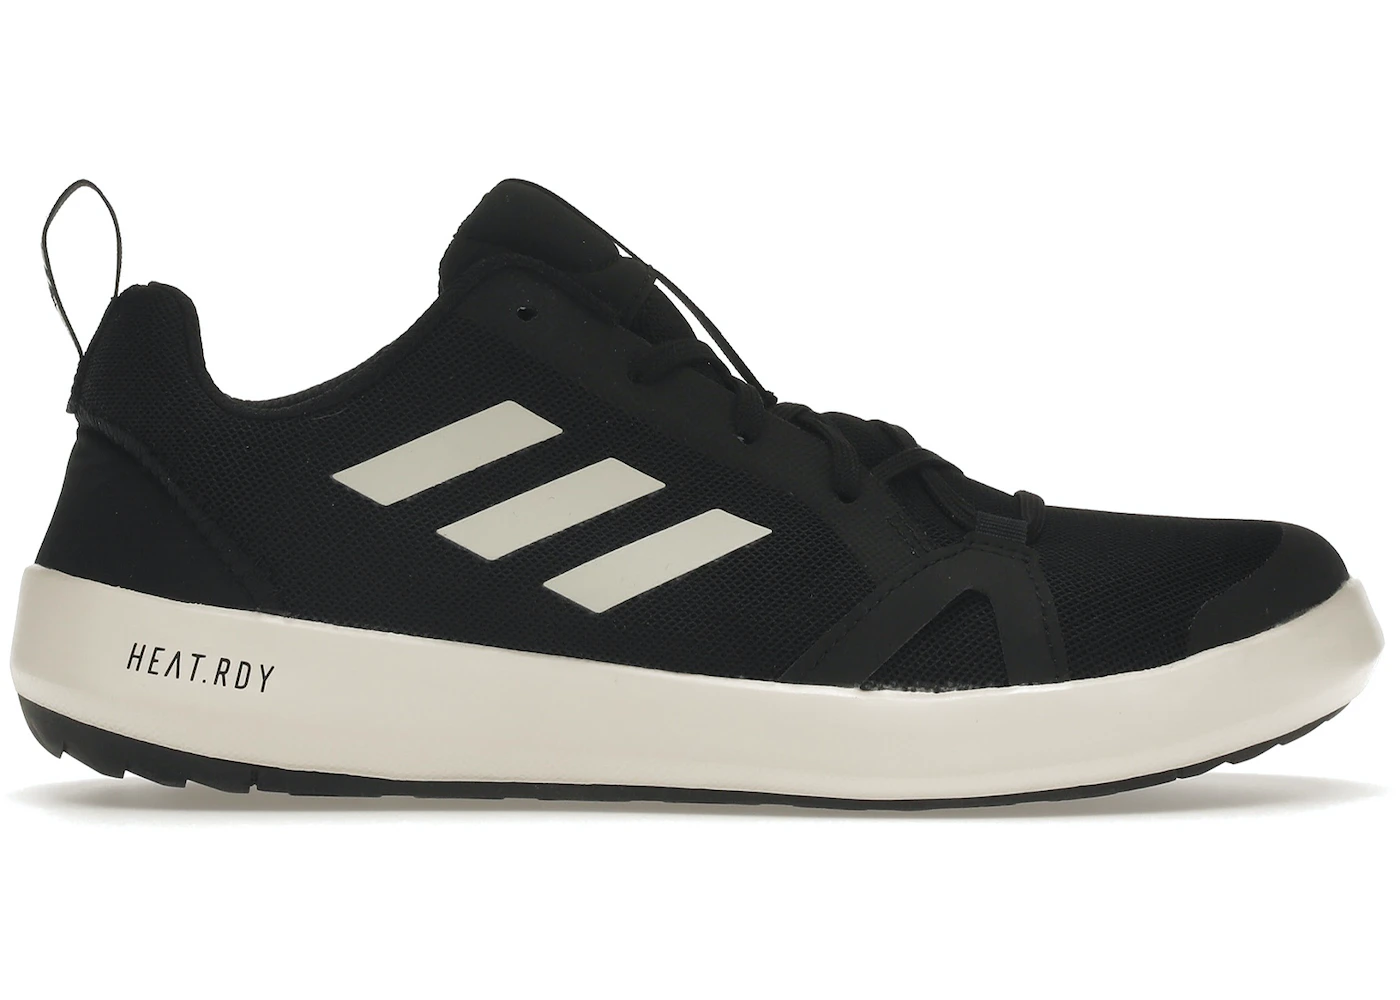 adidas Boat S.rdy Water Core Black Men's - BC0506 - US